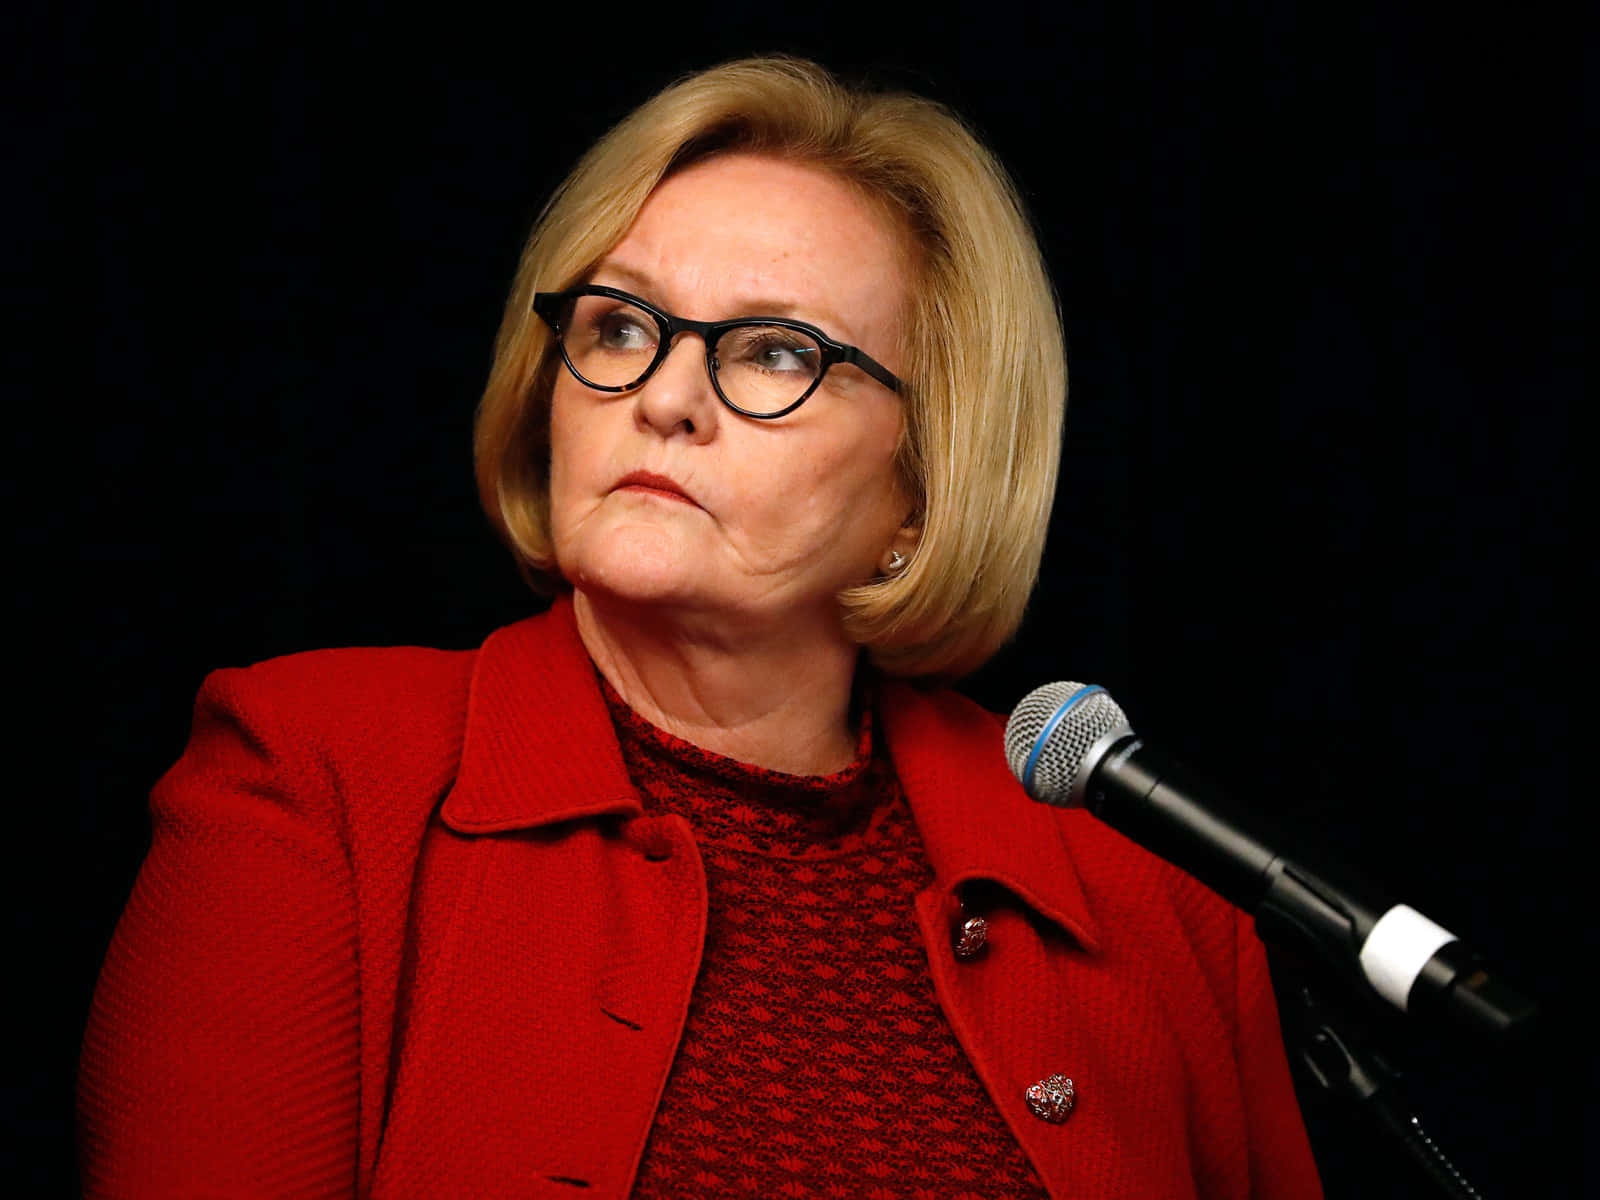 Claire Mccaskill In A Red Outfit Wallpaper